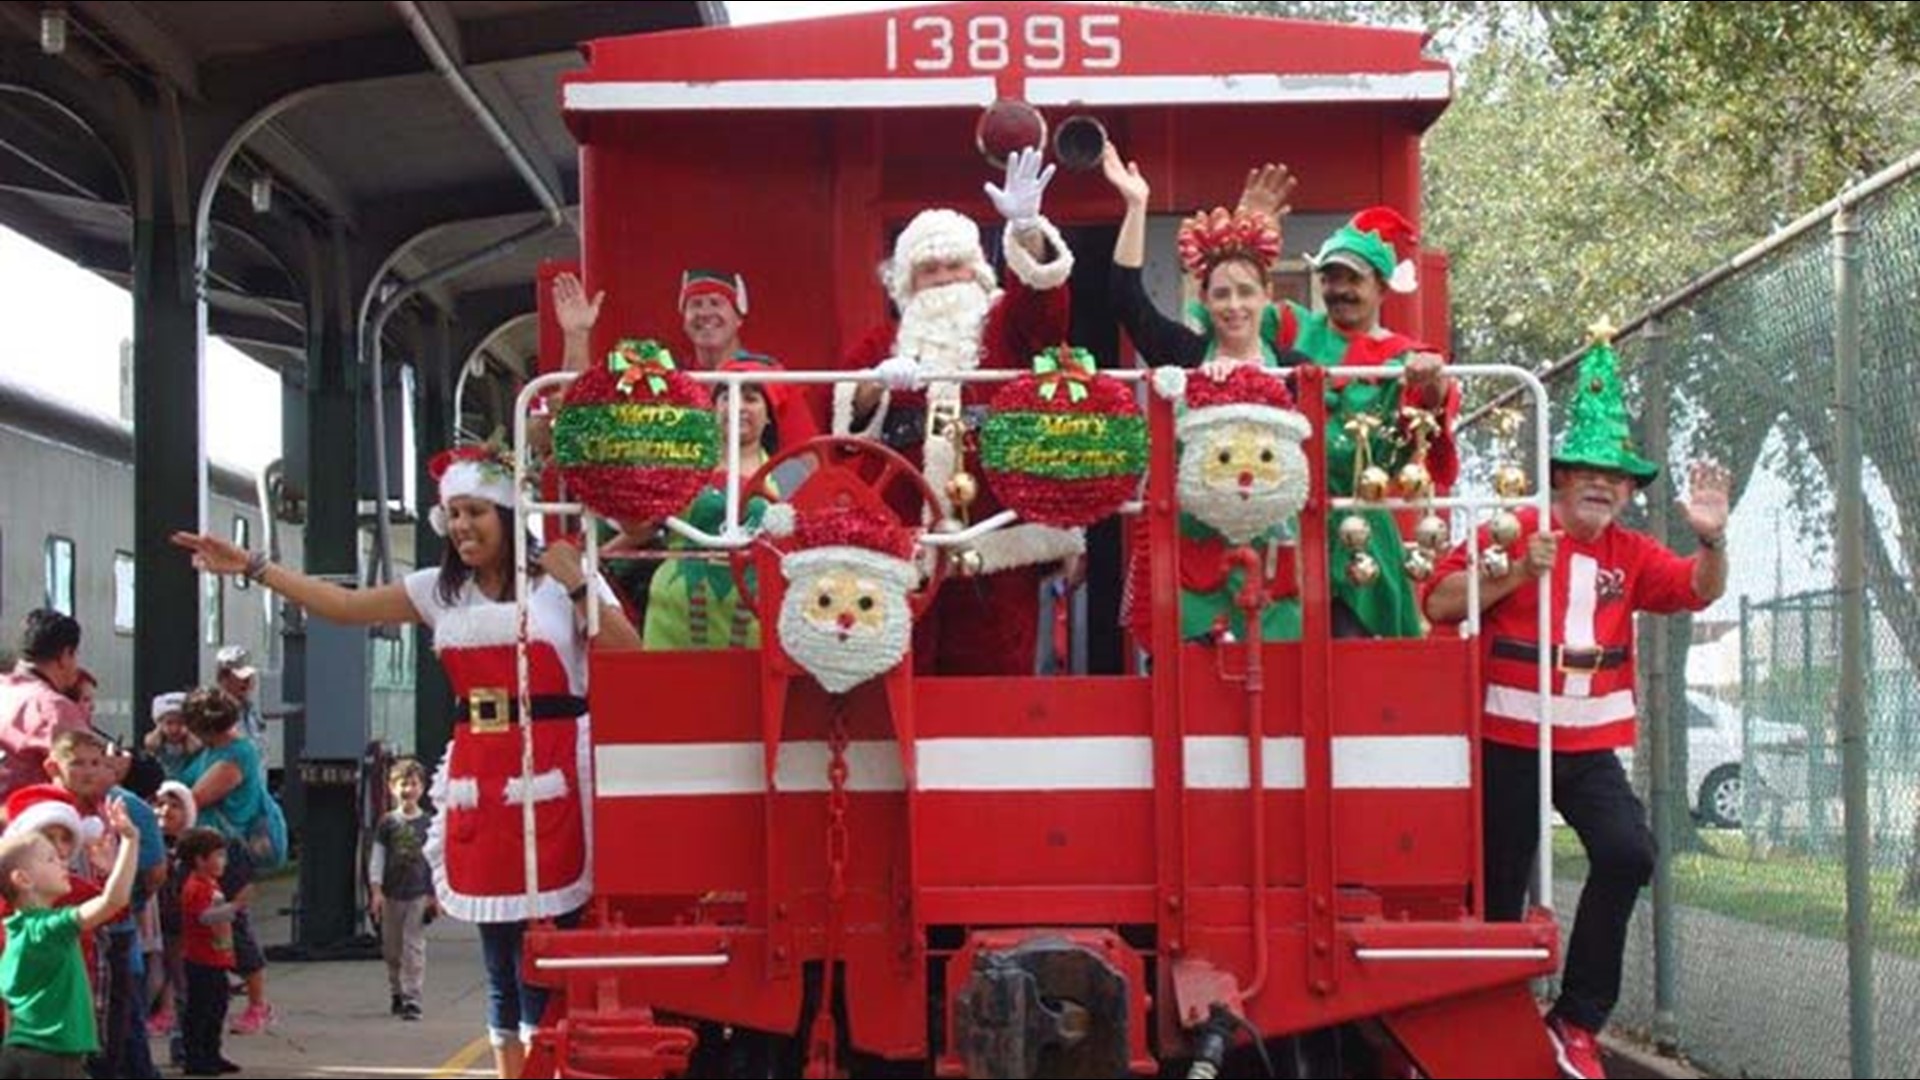 get-tickets-now-for-the-polar-express-train-ride-in-galveston-khou